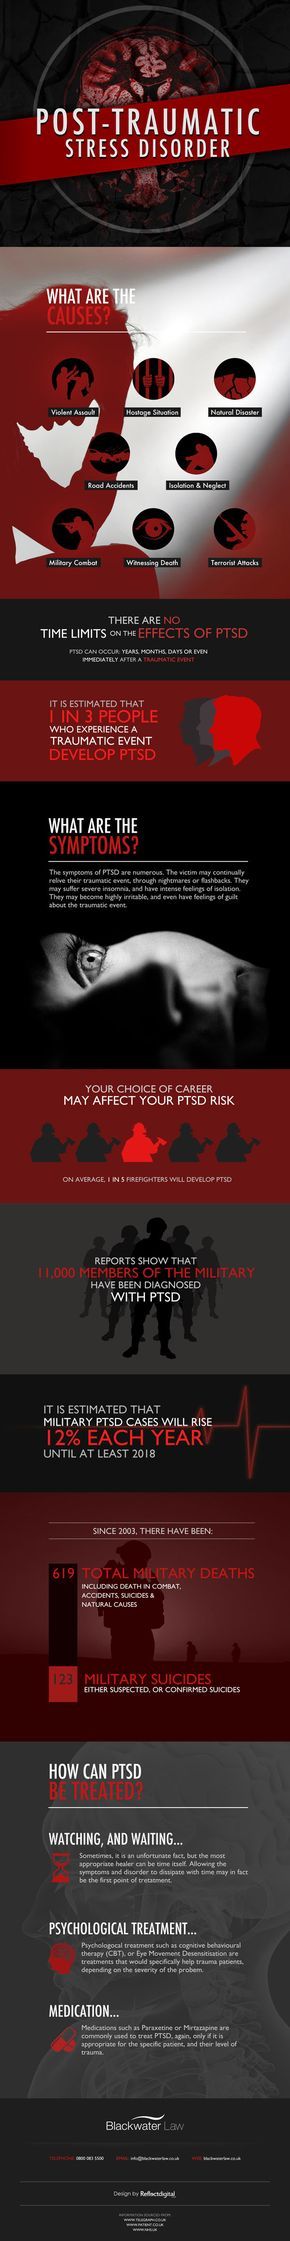 1535661046_387_Psychology-Infographic-Post-traumatic-stress-disorder-PTSD-Claims-Infographic Psychology Infographic : Post-traumatic stress disorder | PTSD Claims Infographic